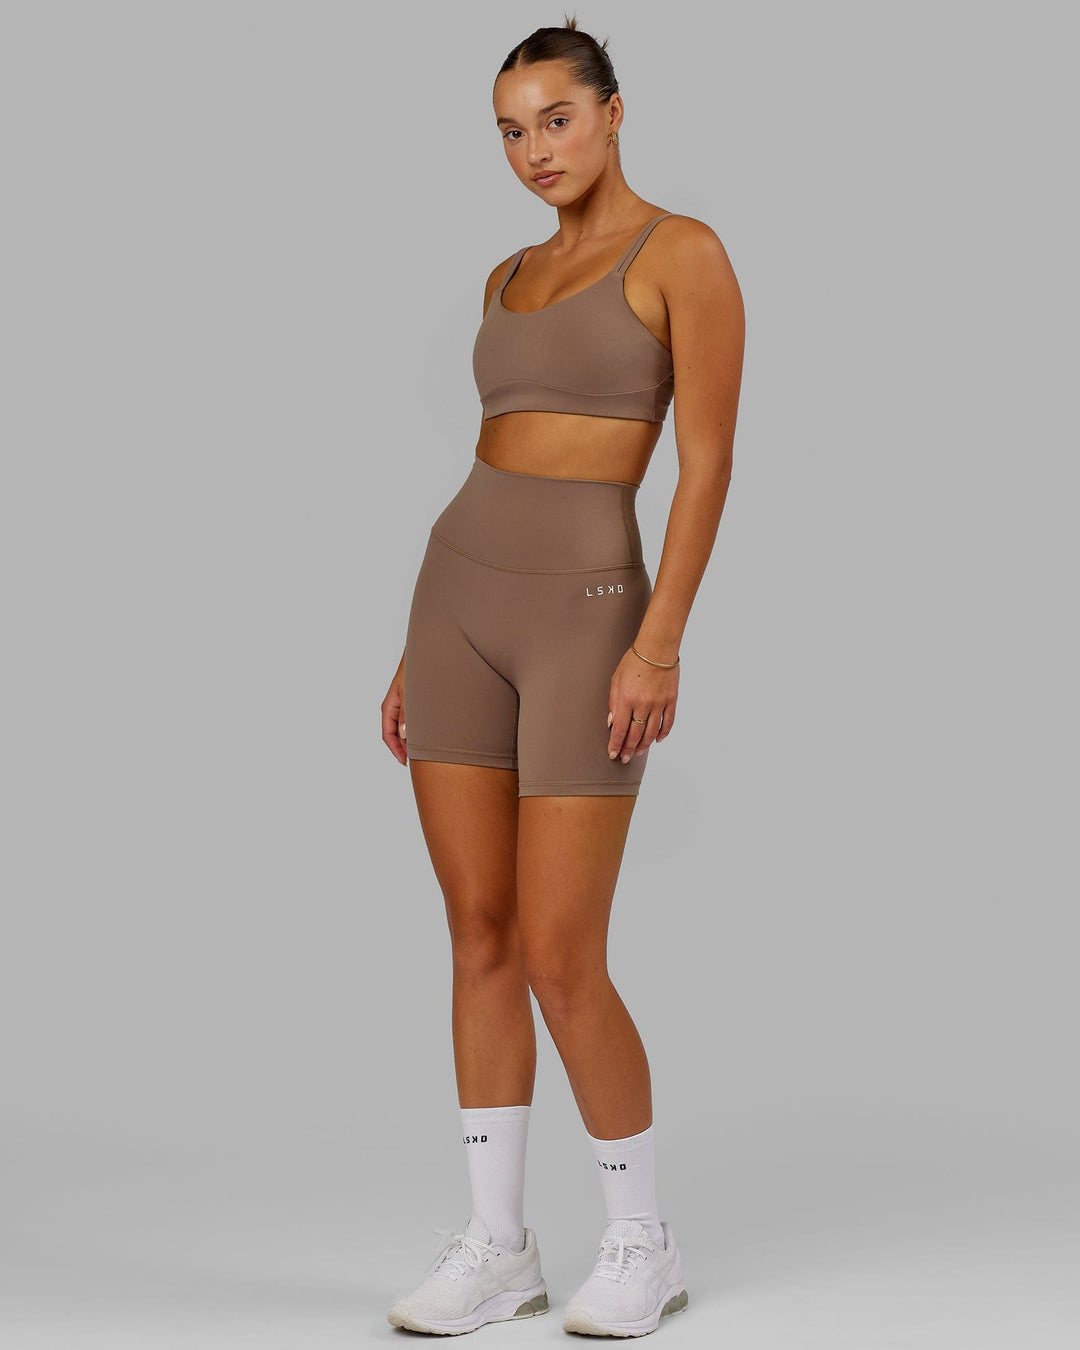 Woman wearing Structure Sports Bra - Deep Taupe